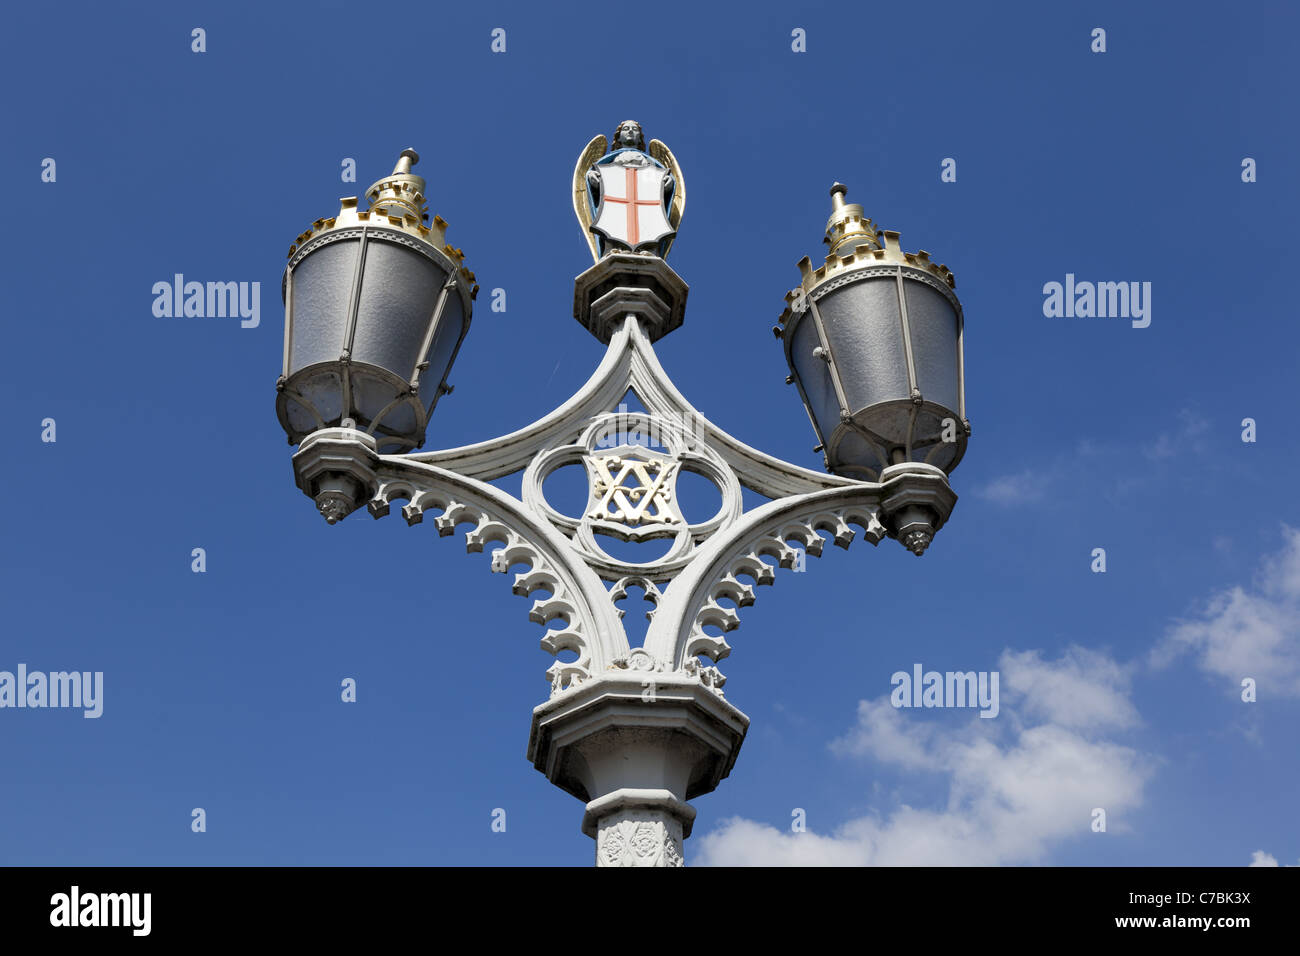 Ornate lamp on the Lendal Bridge over the River Ouse in York, England Stock Photo